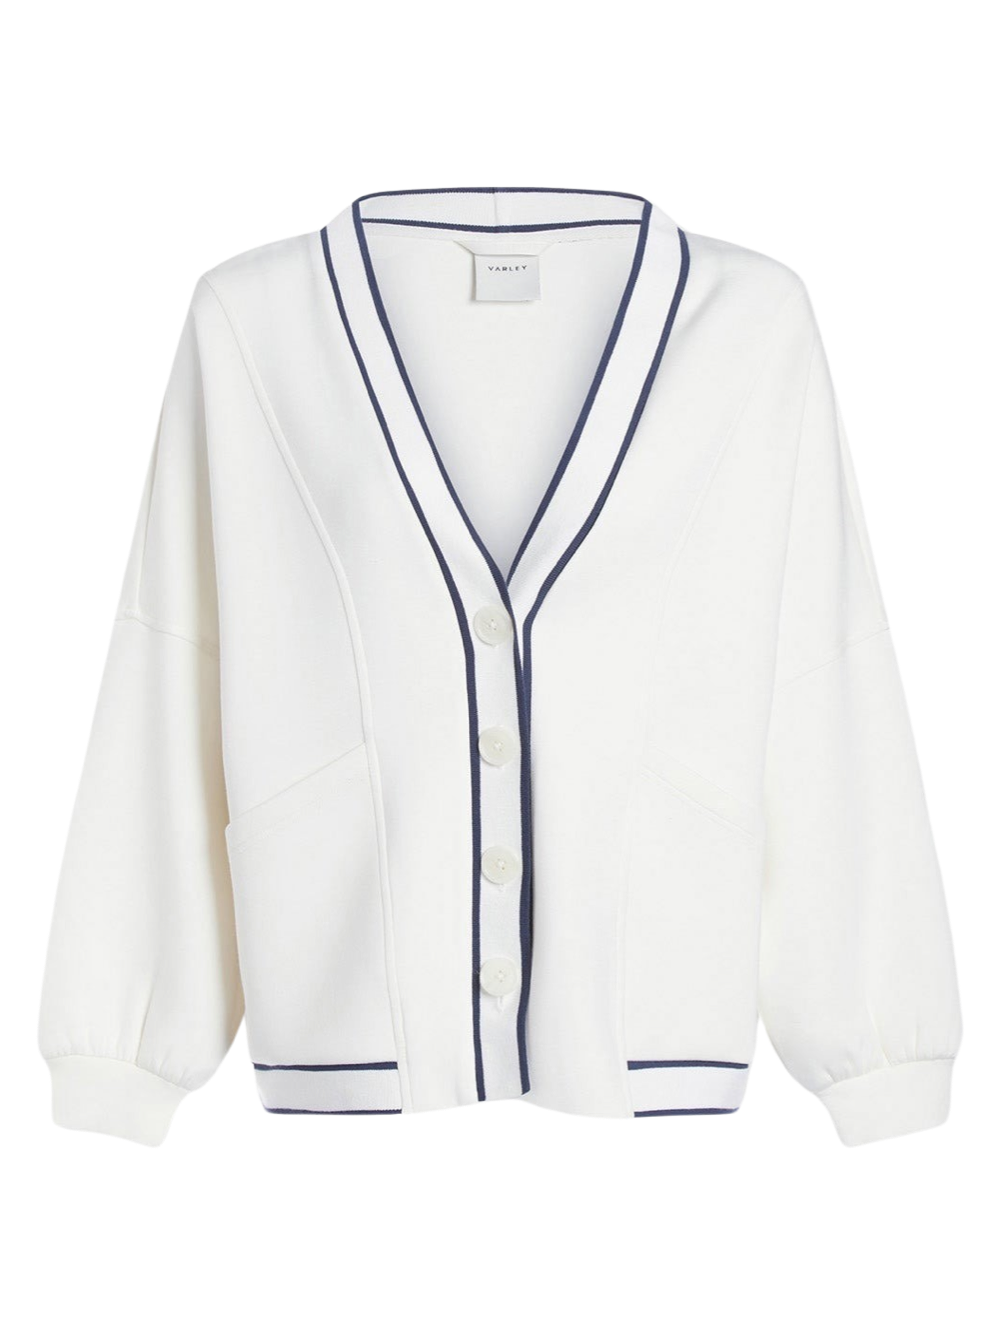 Varley Decker Off-Court Cardigan (More Colors)